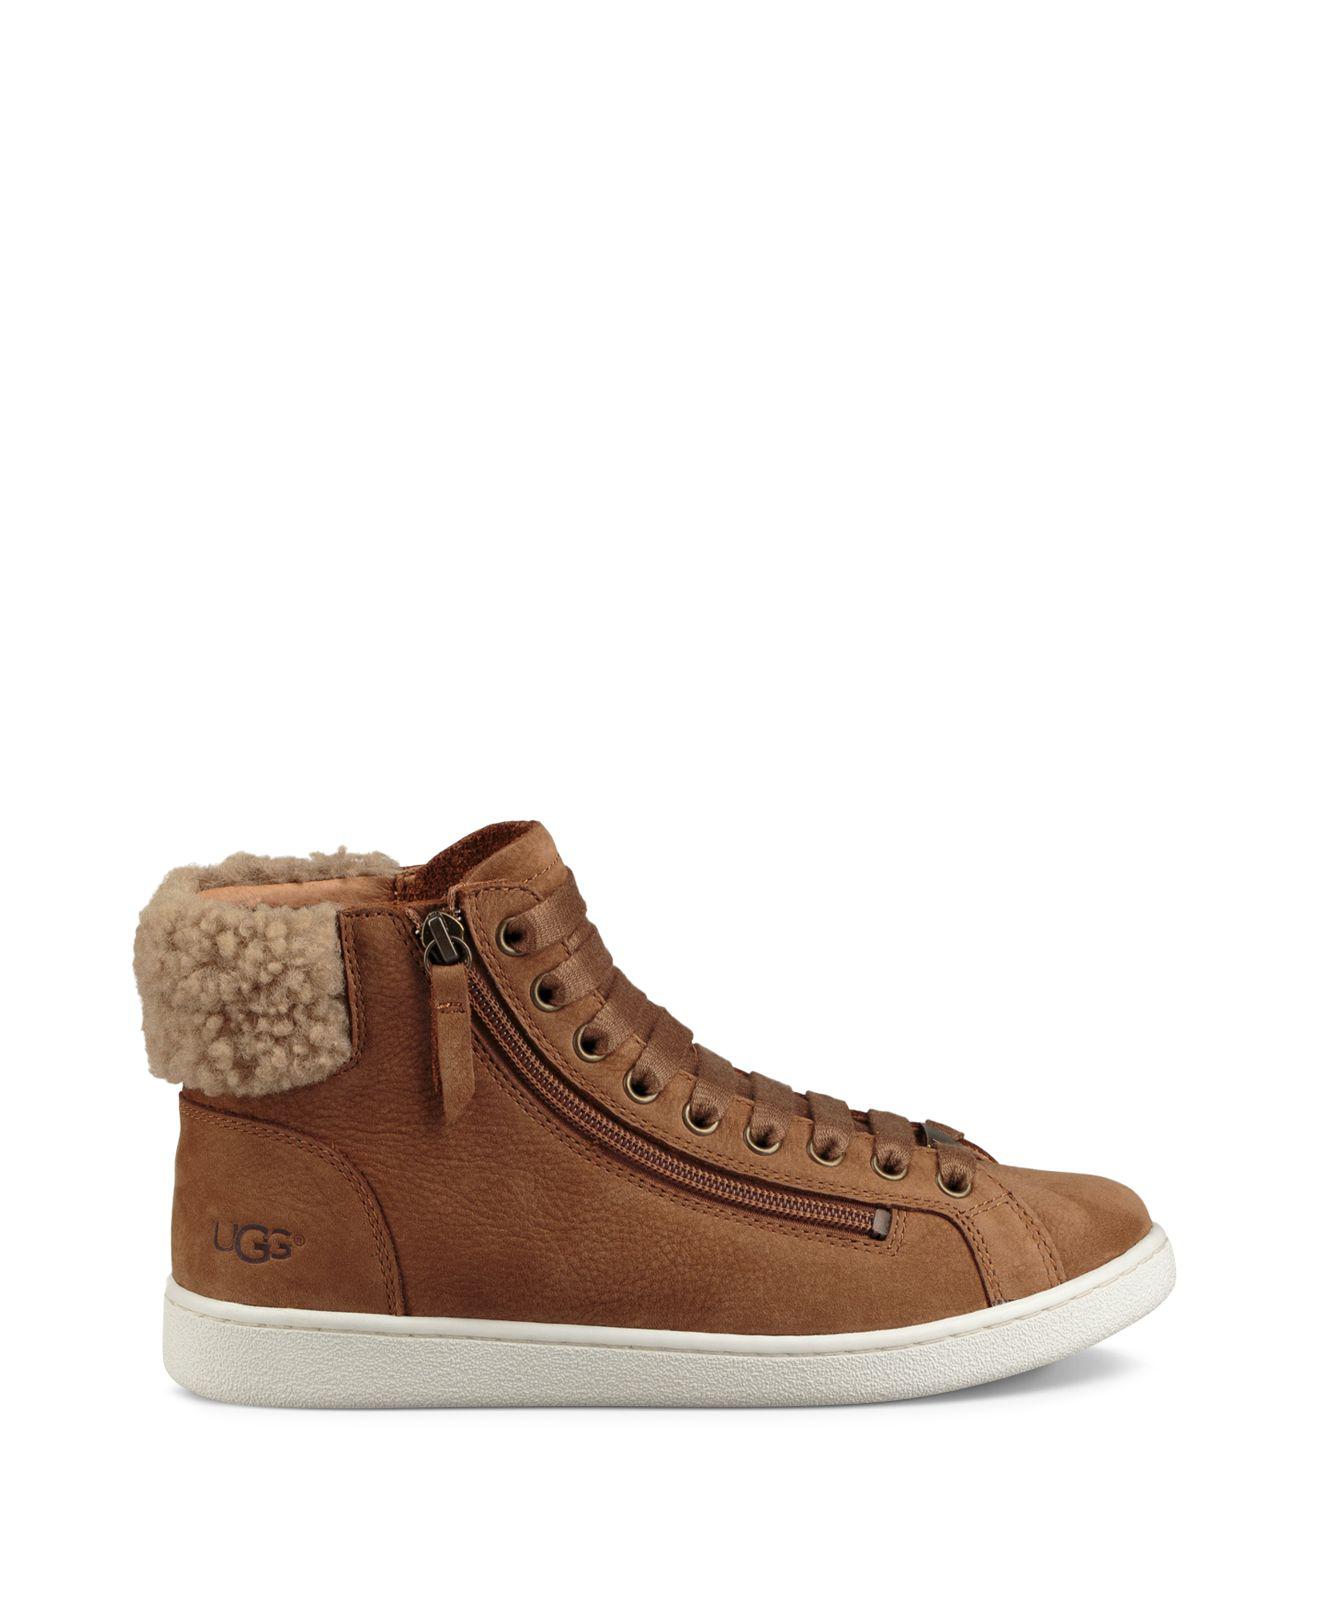 UGG Olive Leather And Sheepskin High Top Sneakers in Chestnut (Brown) | Lyst